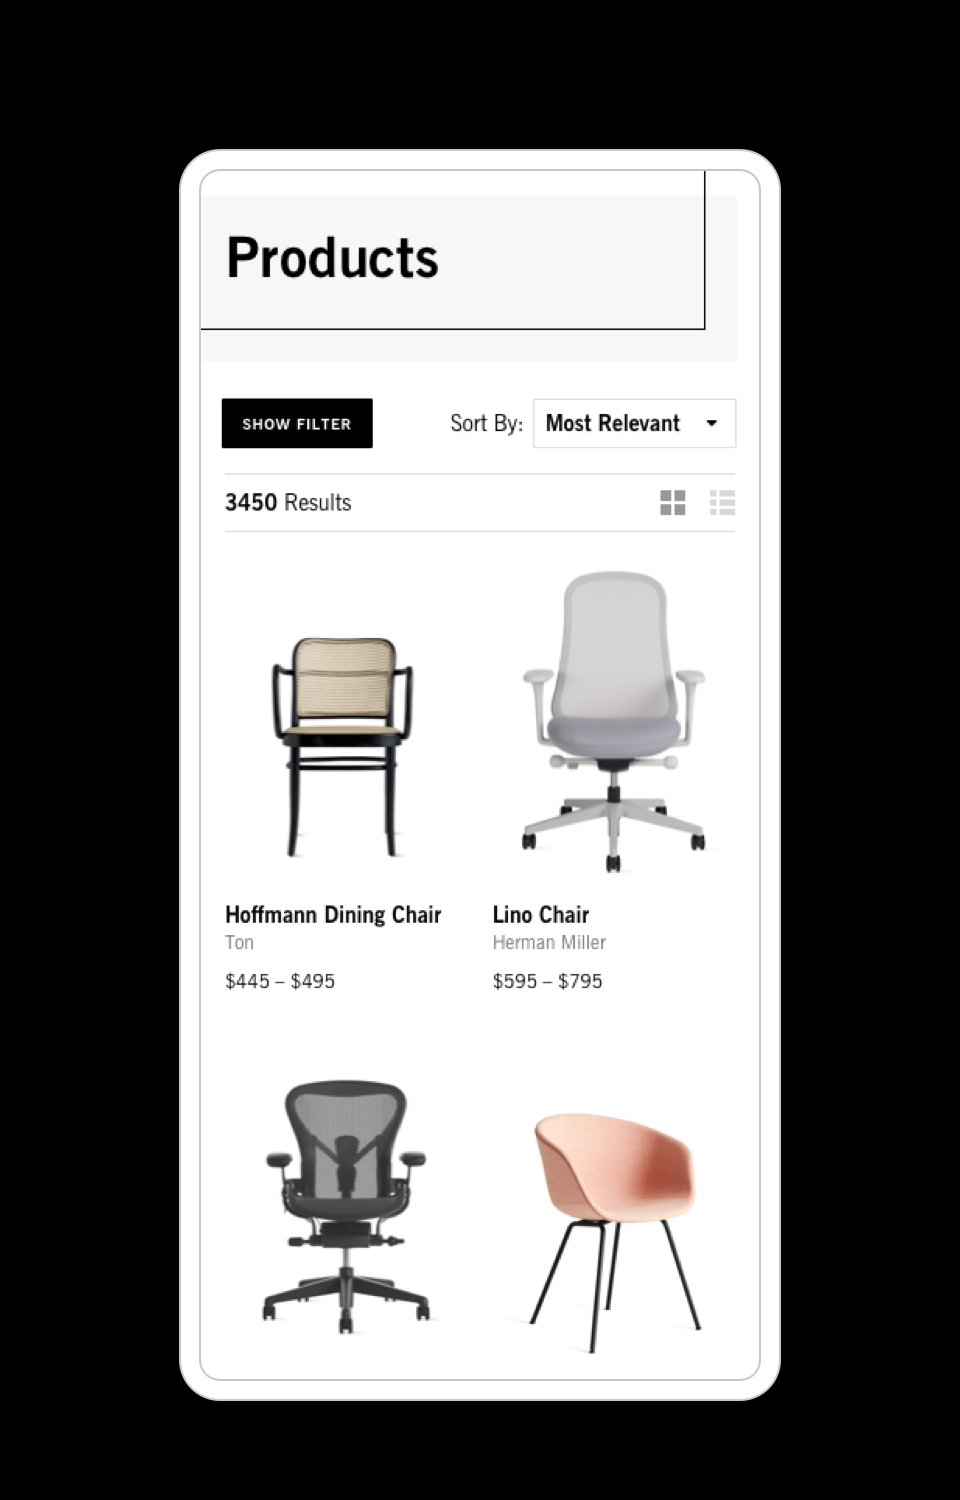 DWRC mobile product list page featuring Hoffmann dining chair and Lino chair